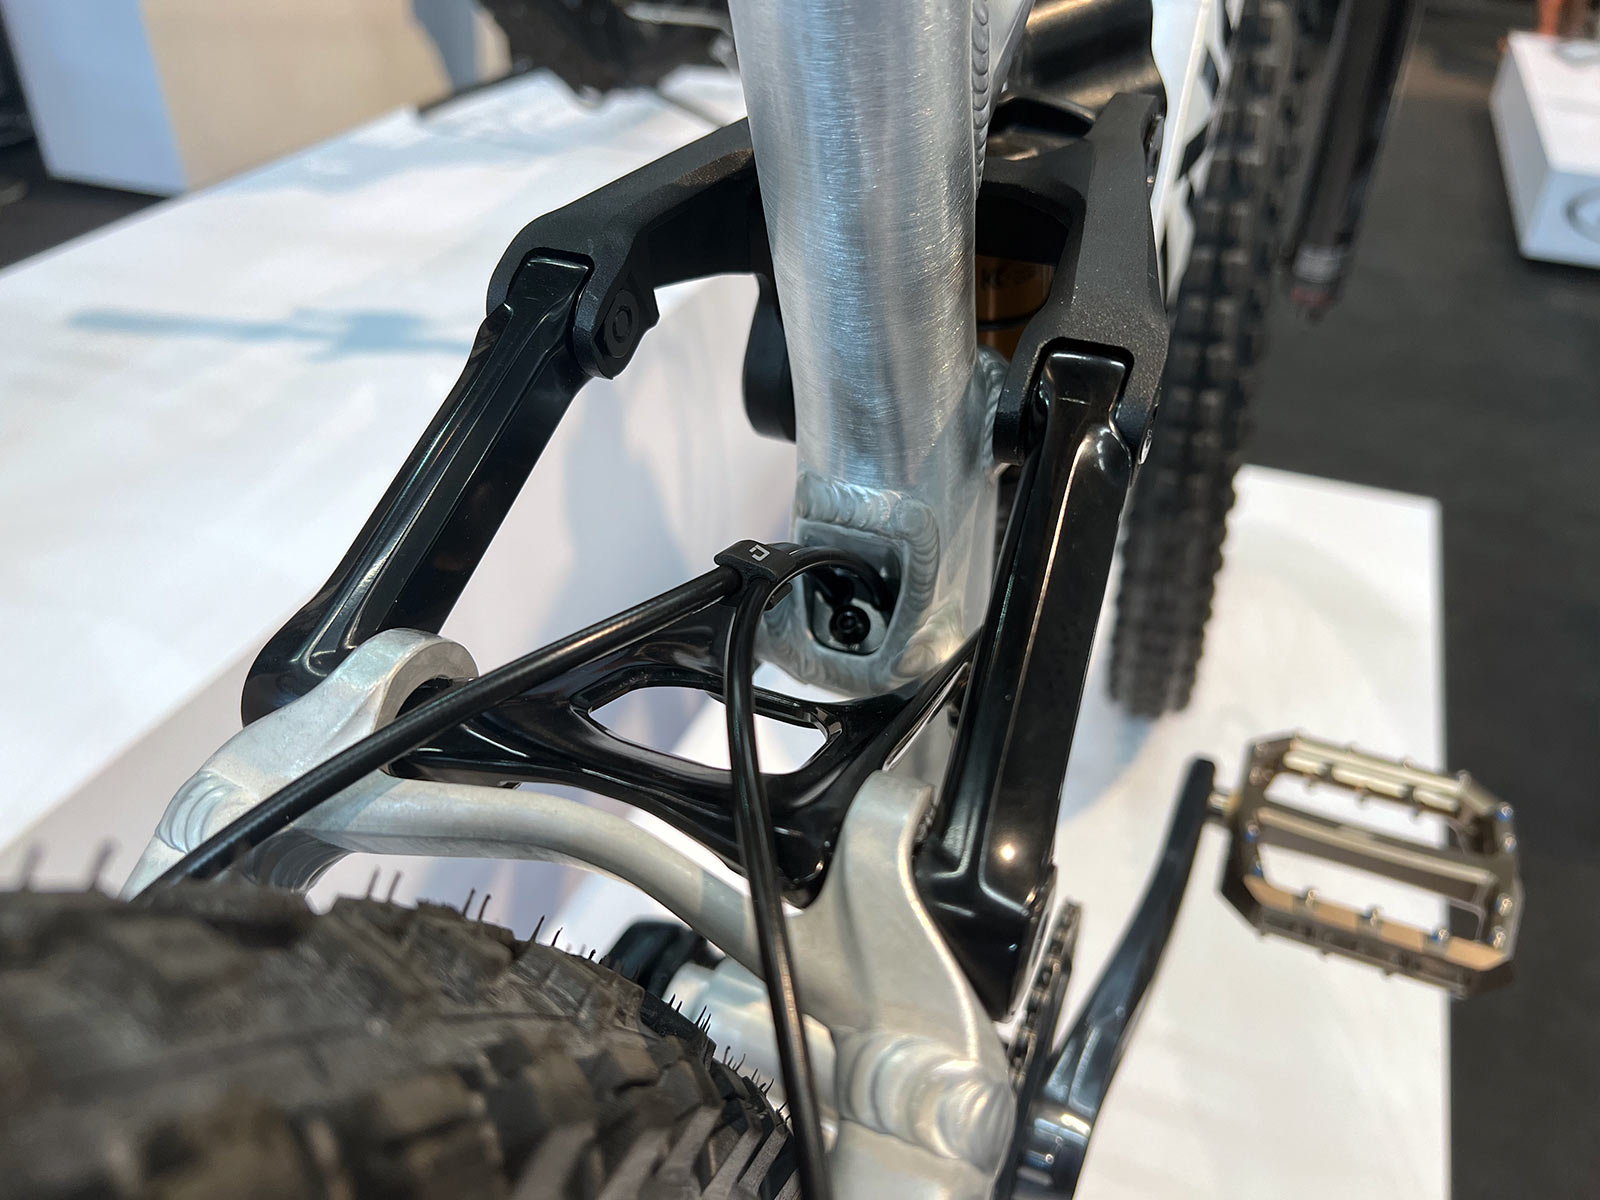 knolly rear brake and shift cable port exits from the seat tube